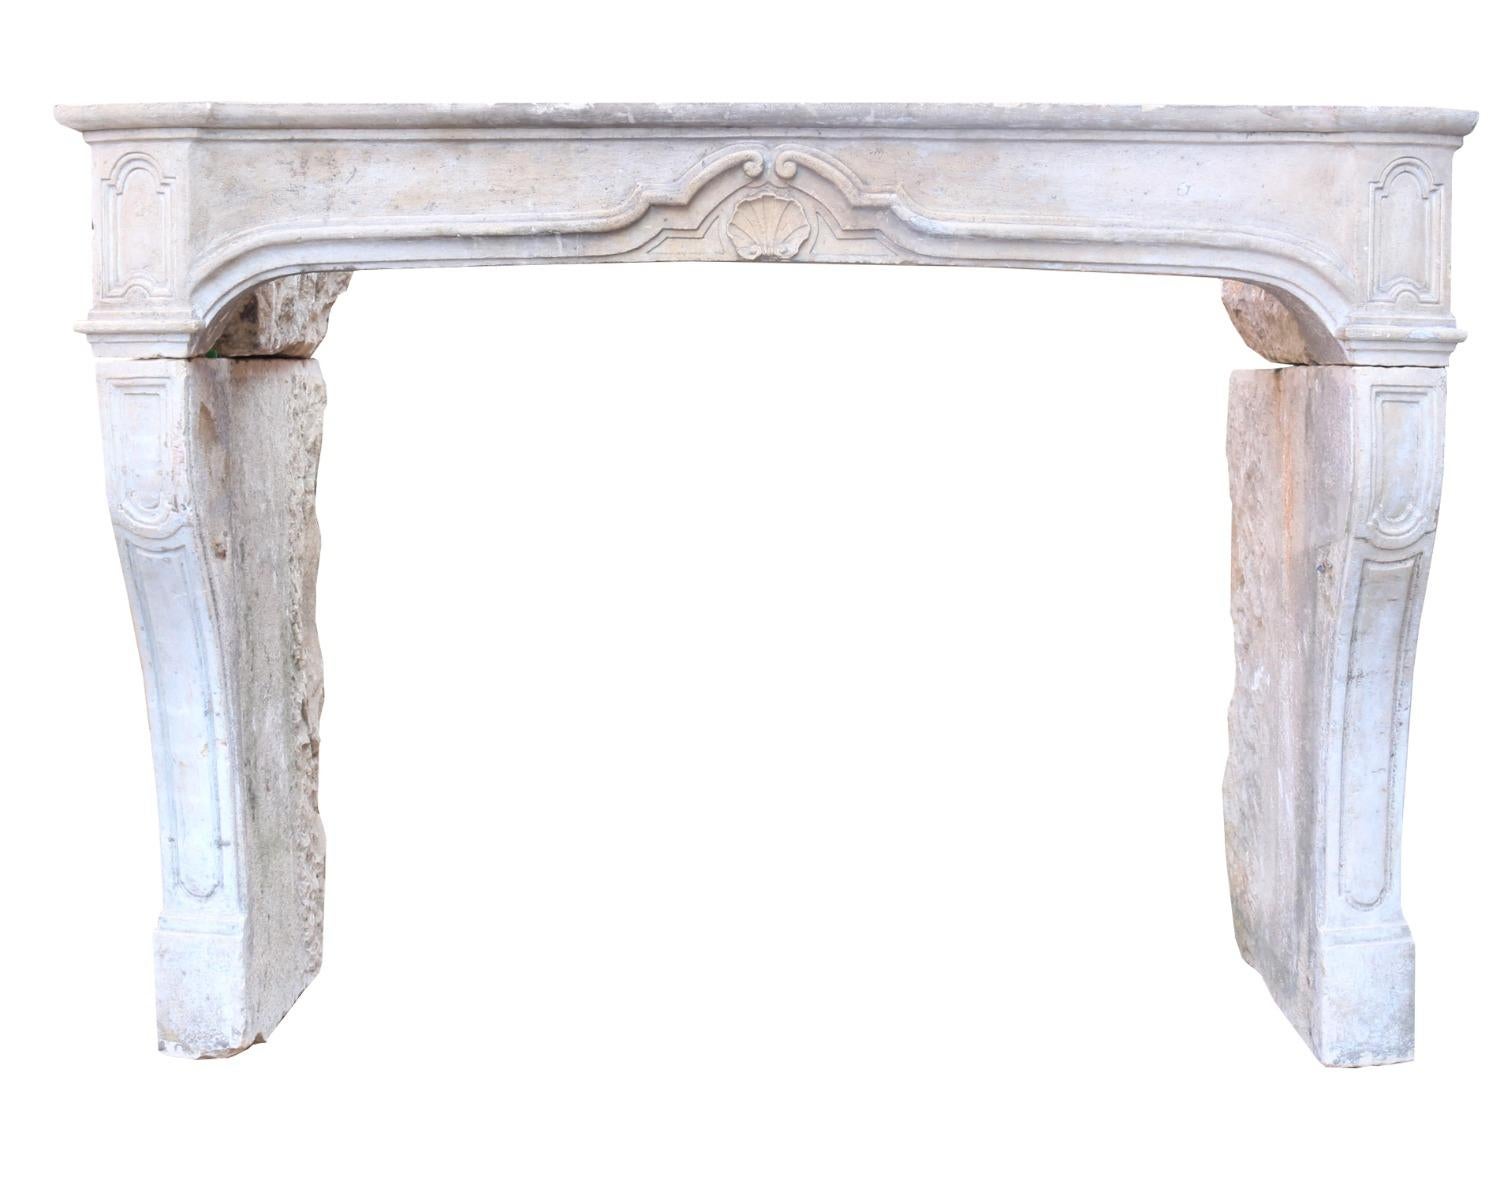 An attractive pale limestone surround with shaped top, frieze with central shell motif and curving supports.

Measure: Depth 90 cm (maximum) 60 cm (visible once installed)

The depth could be reduced further if required.

Opening Height 94.5